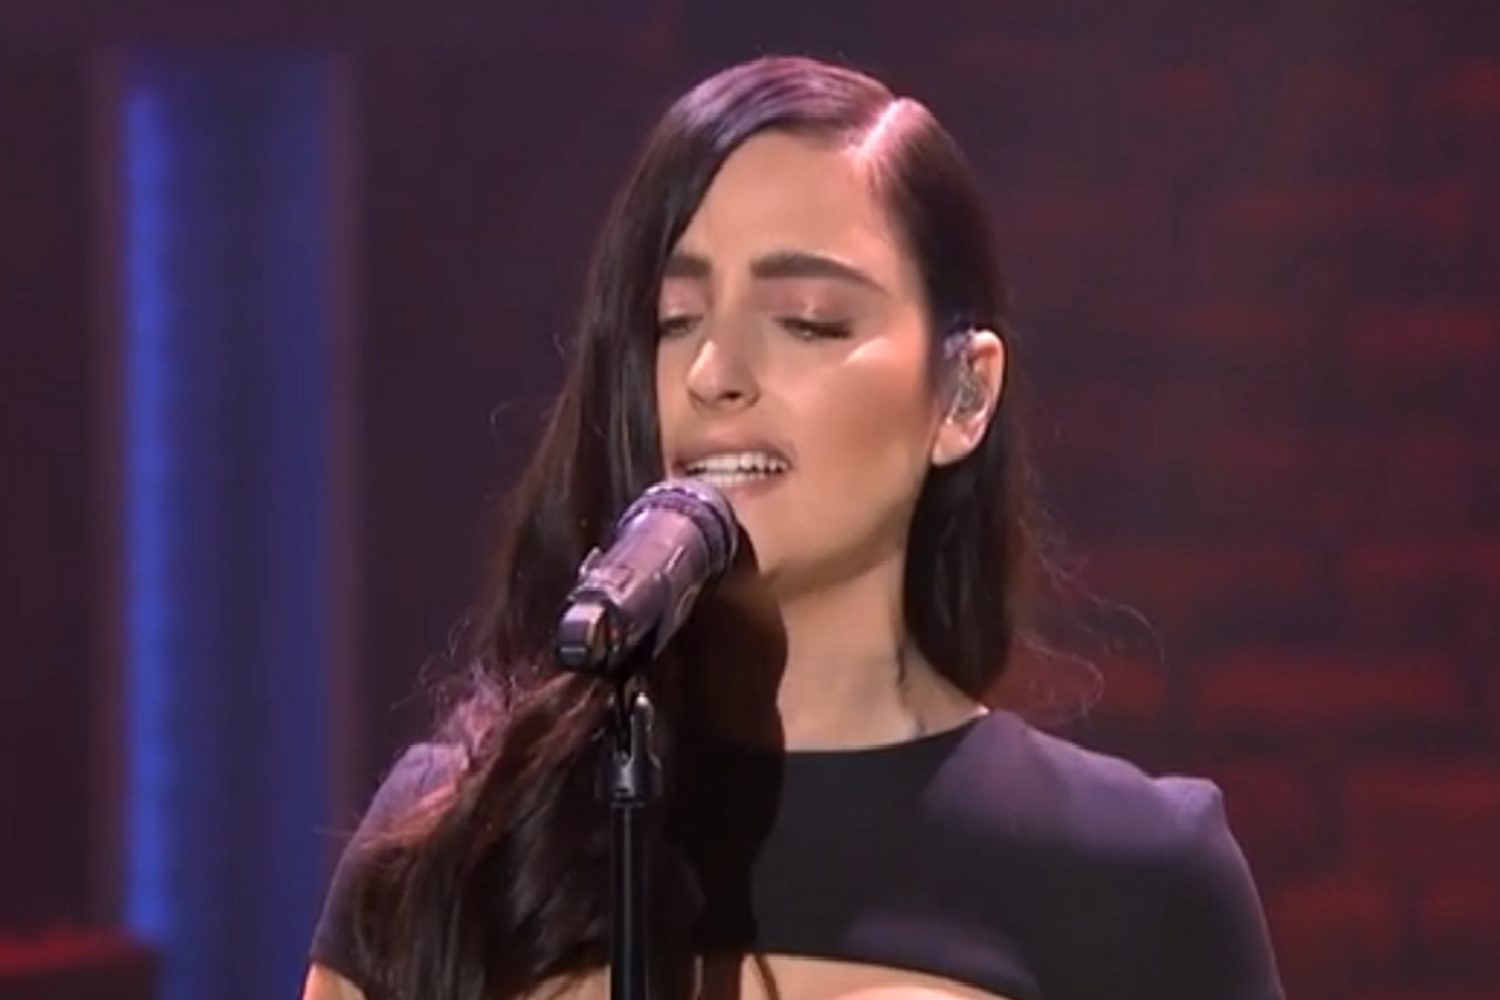 Watch BANKS perform ‘Brain’ on Late Night With Seth Meyers